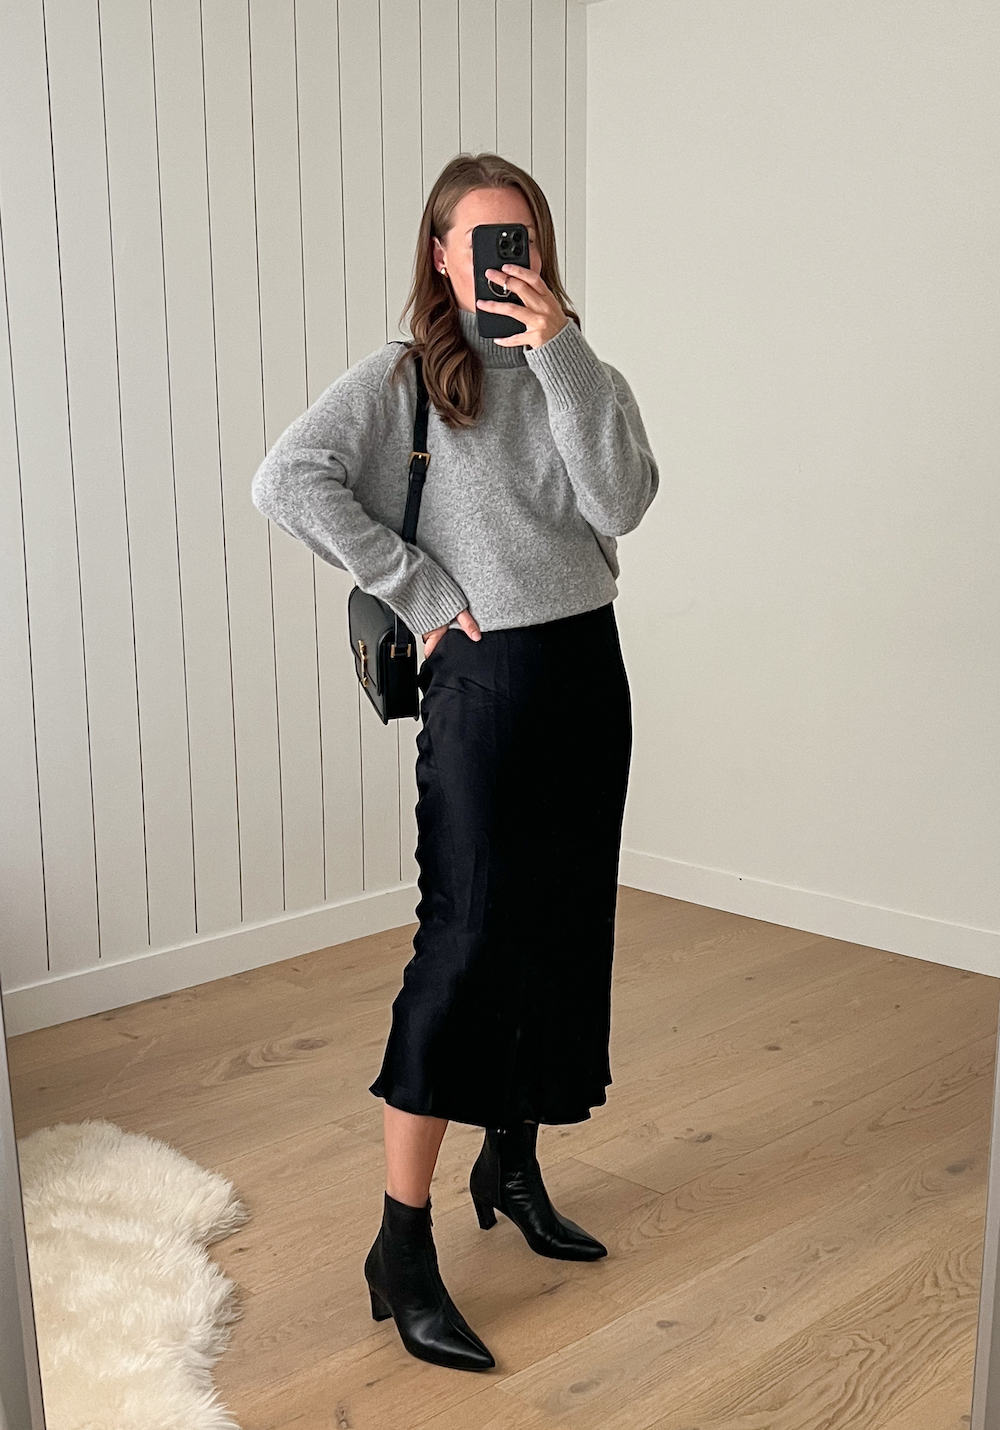 Christal wearing a black slip skirt with black booties and a grey sweater.